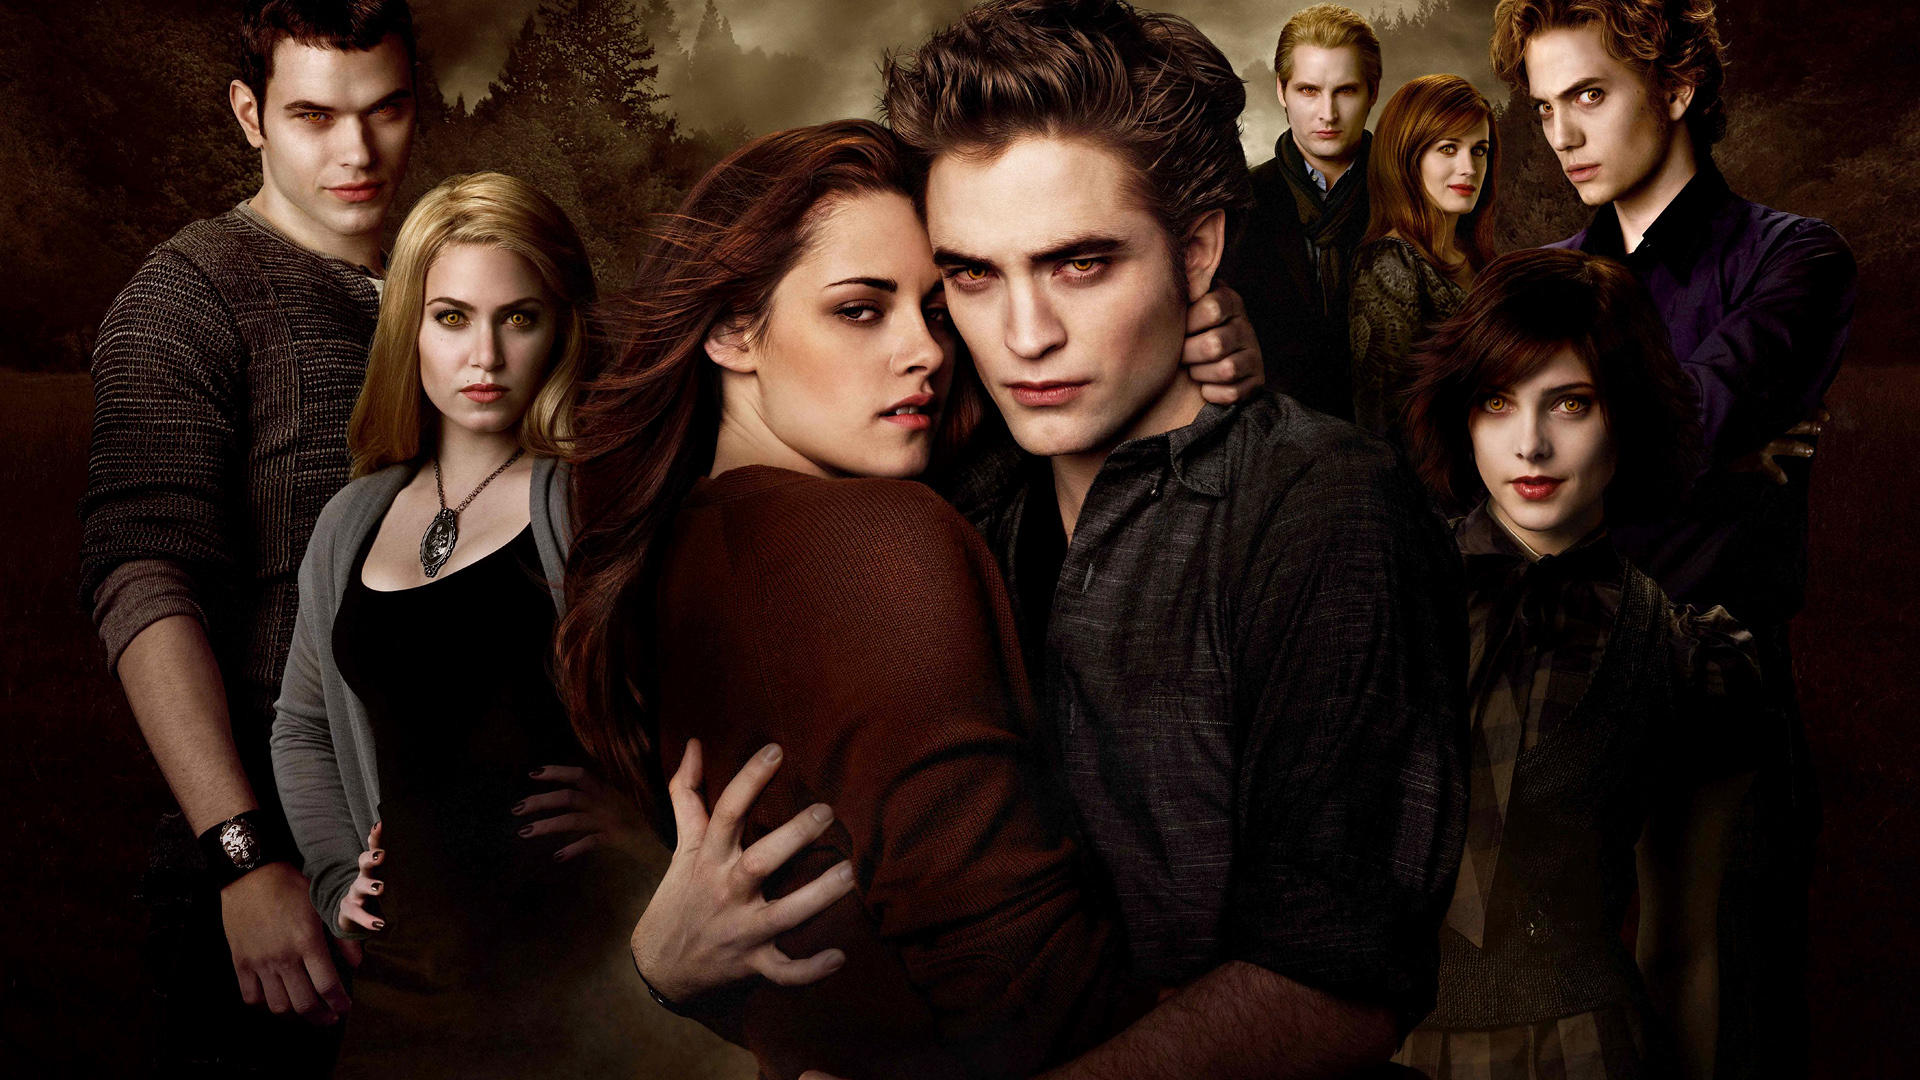 edward cullen wallpapers for cell phones